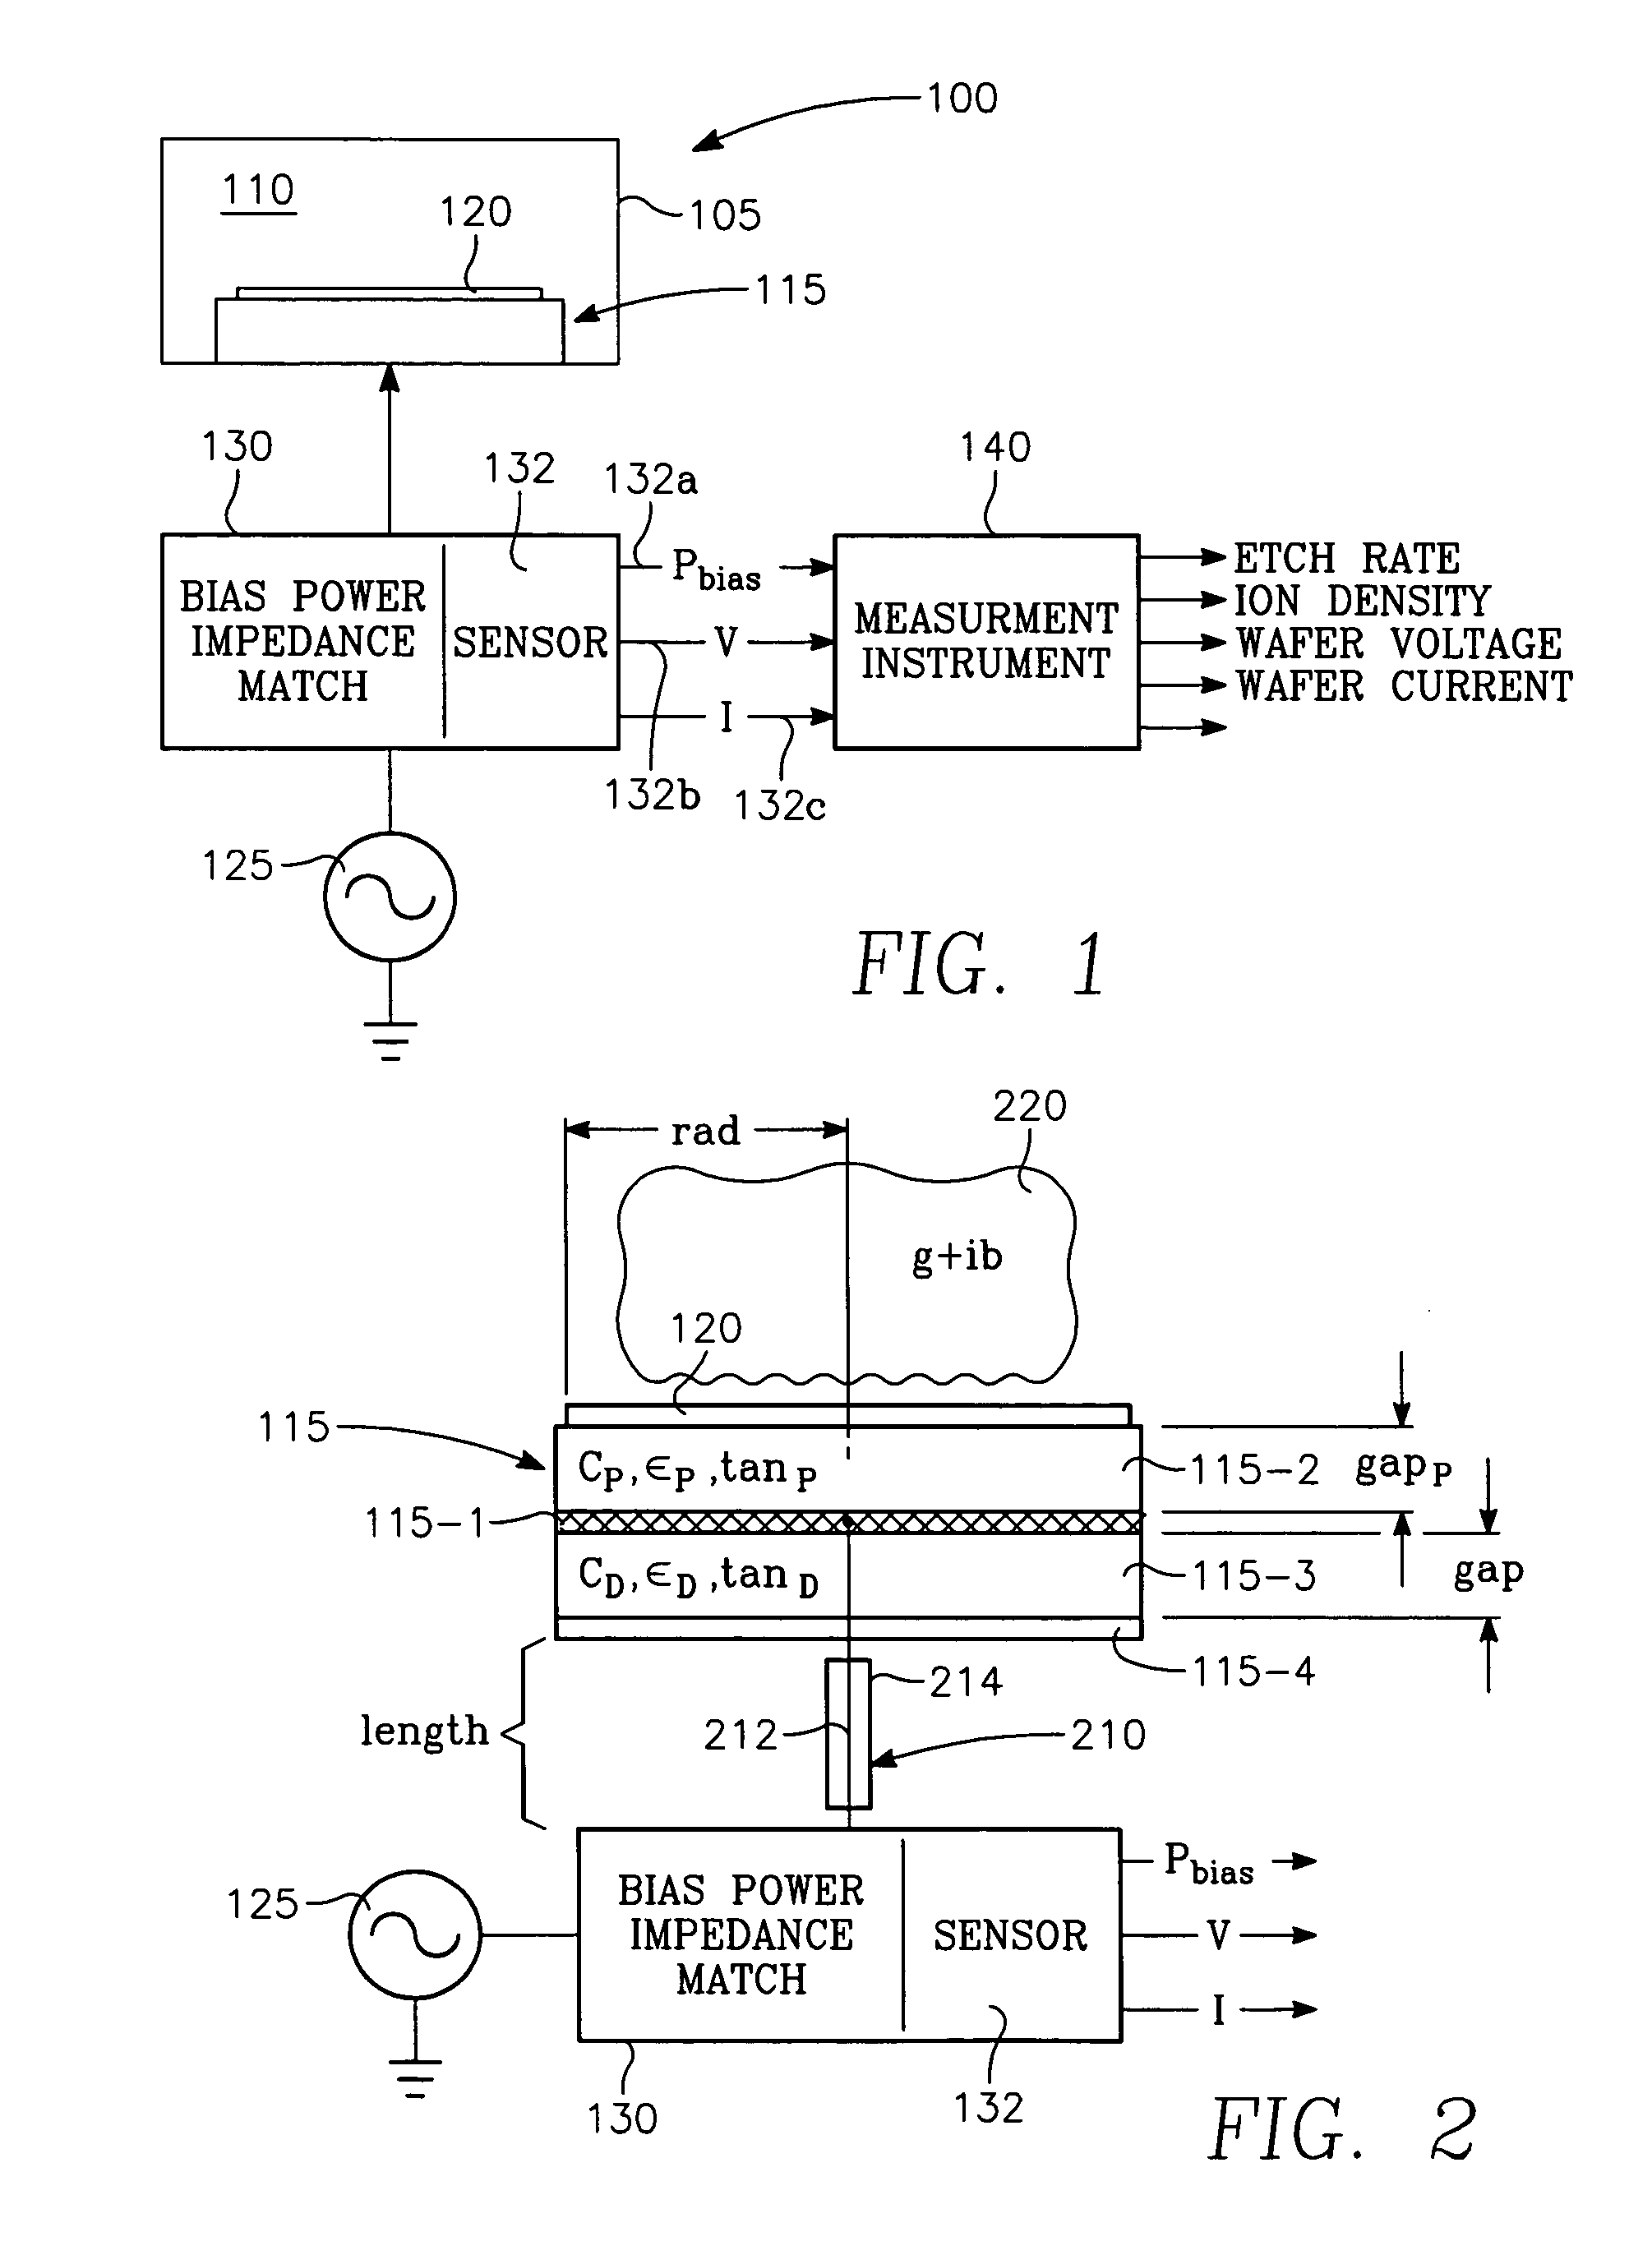 Method of operating a plasma reactor chamber with respect to two plasma parameters selected from a group comprising ion density, wafer voltage, etch rate and wafer current, by controlling chamber parameters of source power and bias power